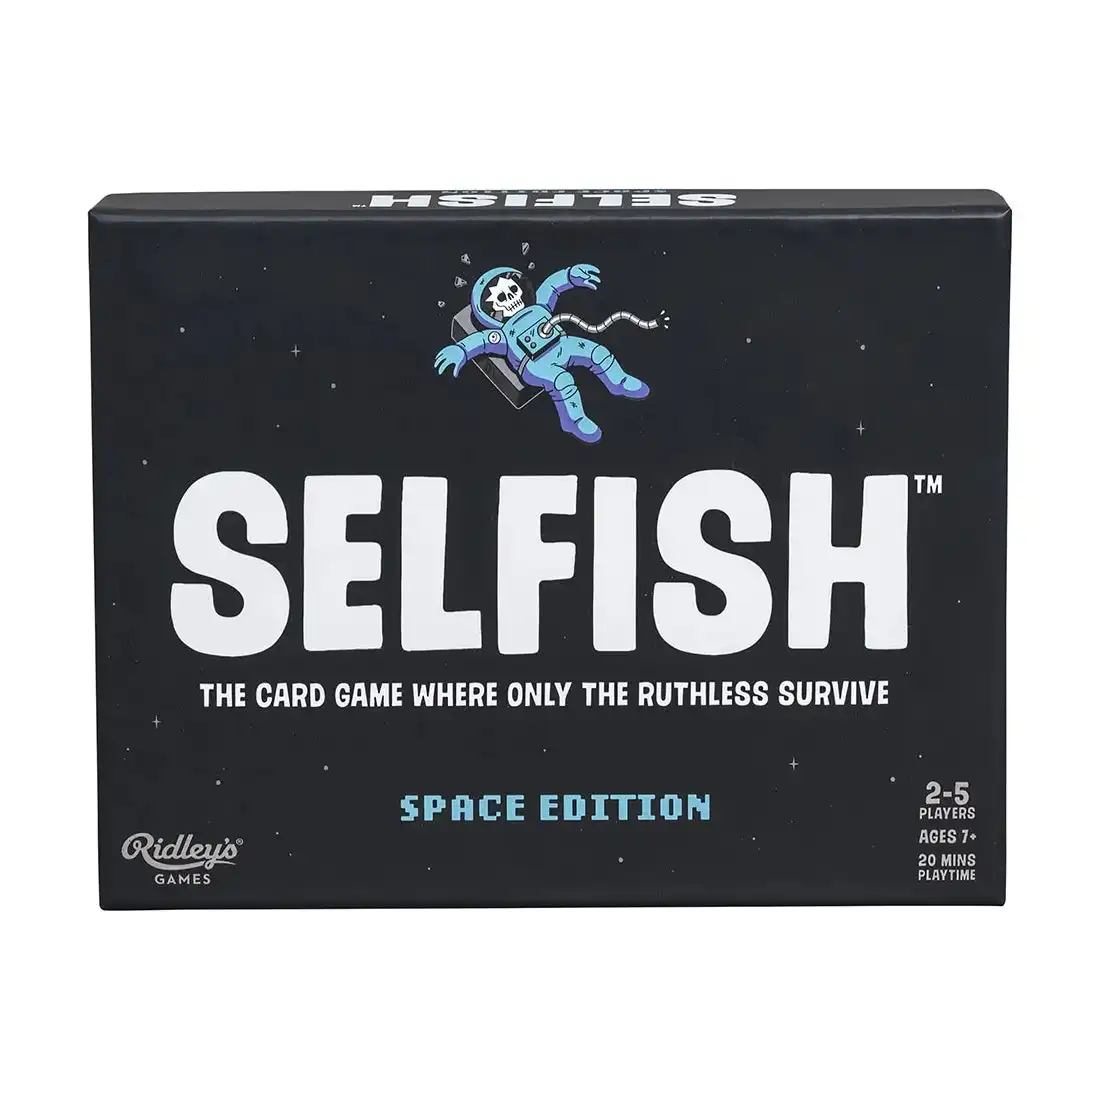 Ridley's Selfish Game - Space Edition